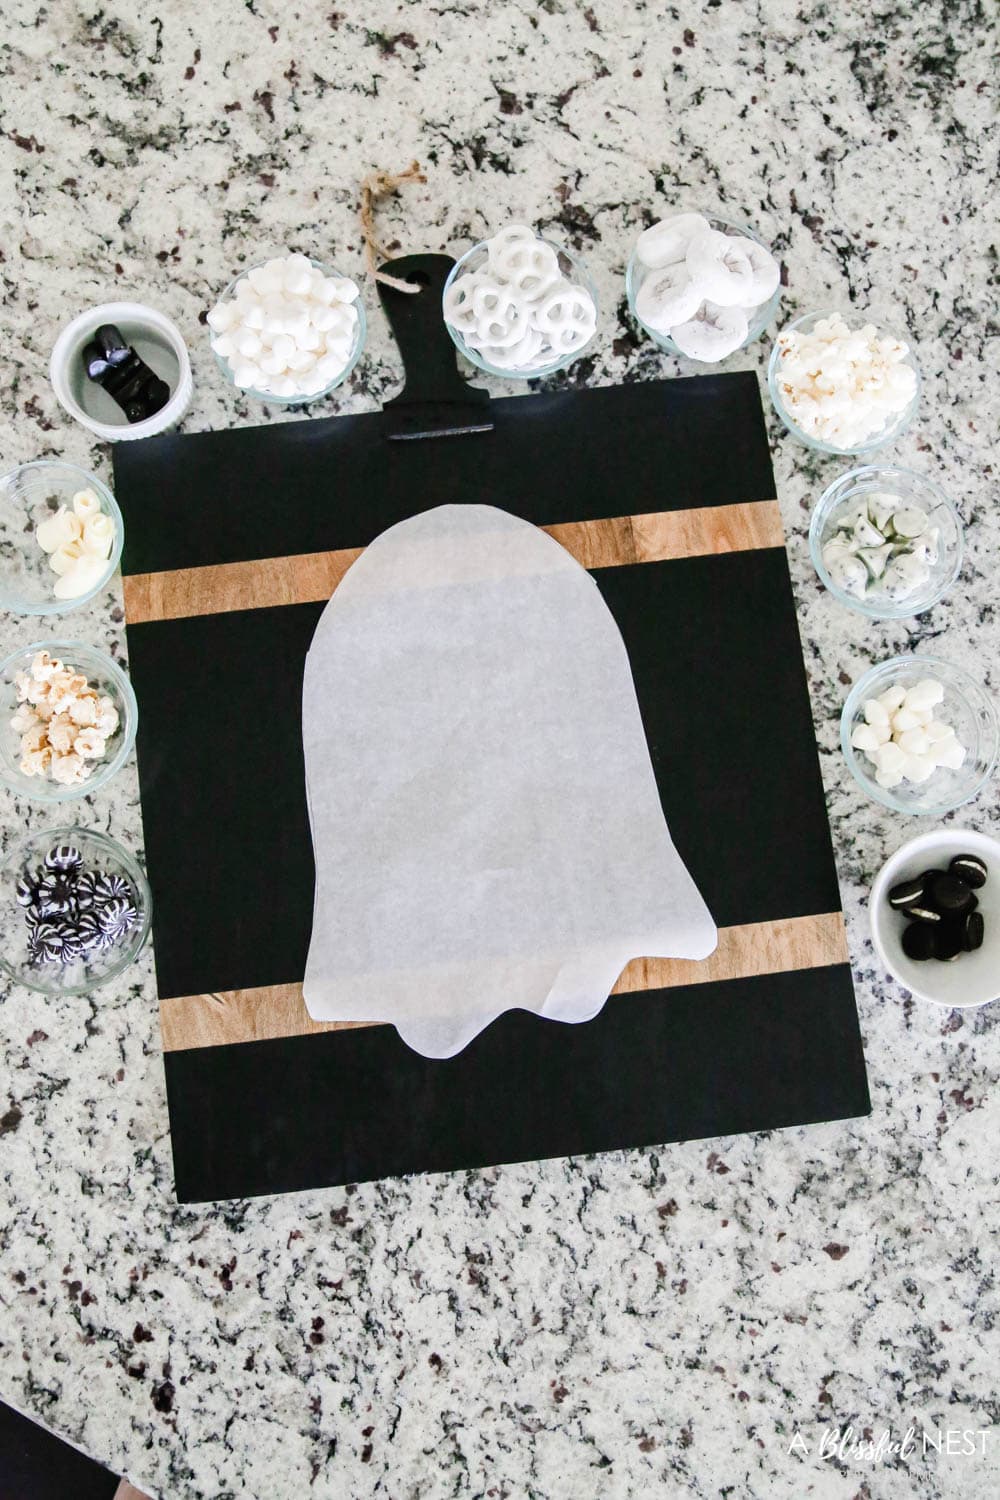 Cutting board with cut out ghost outline on parchment paper with candies in bowls